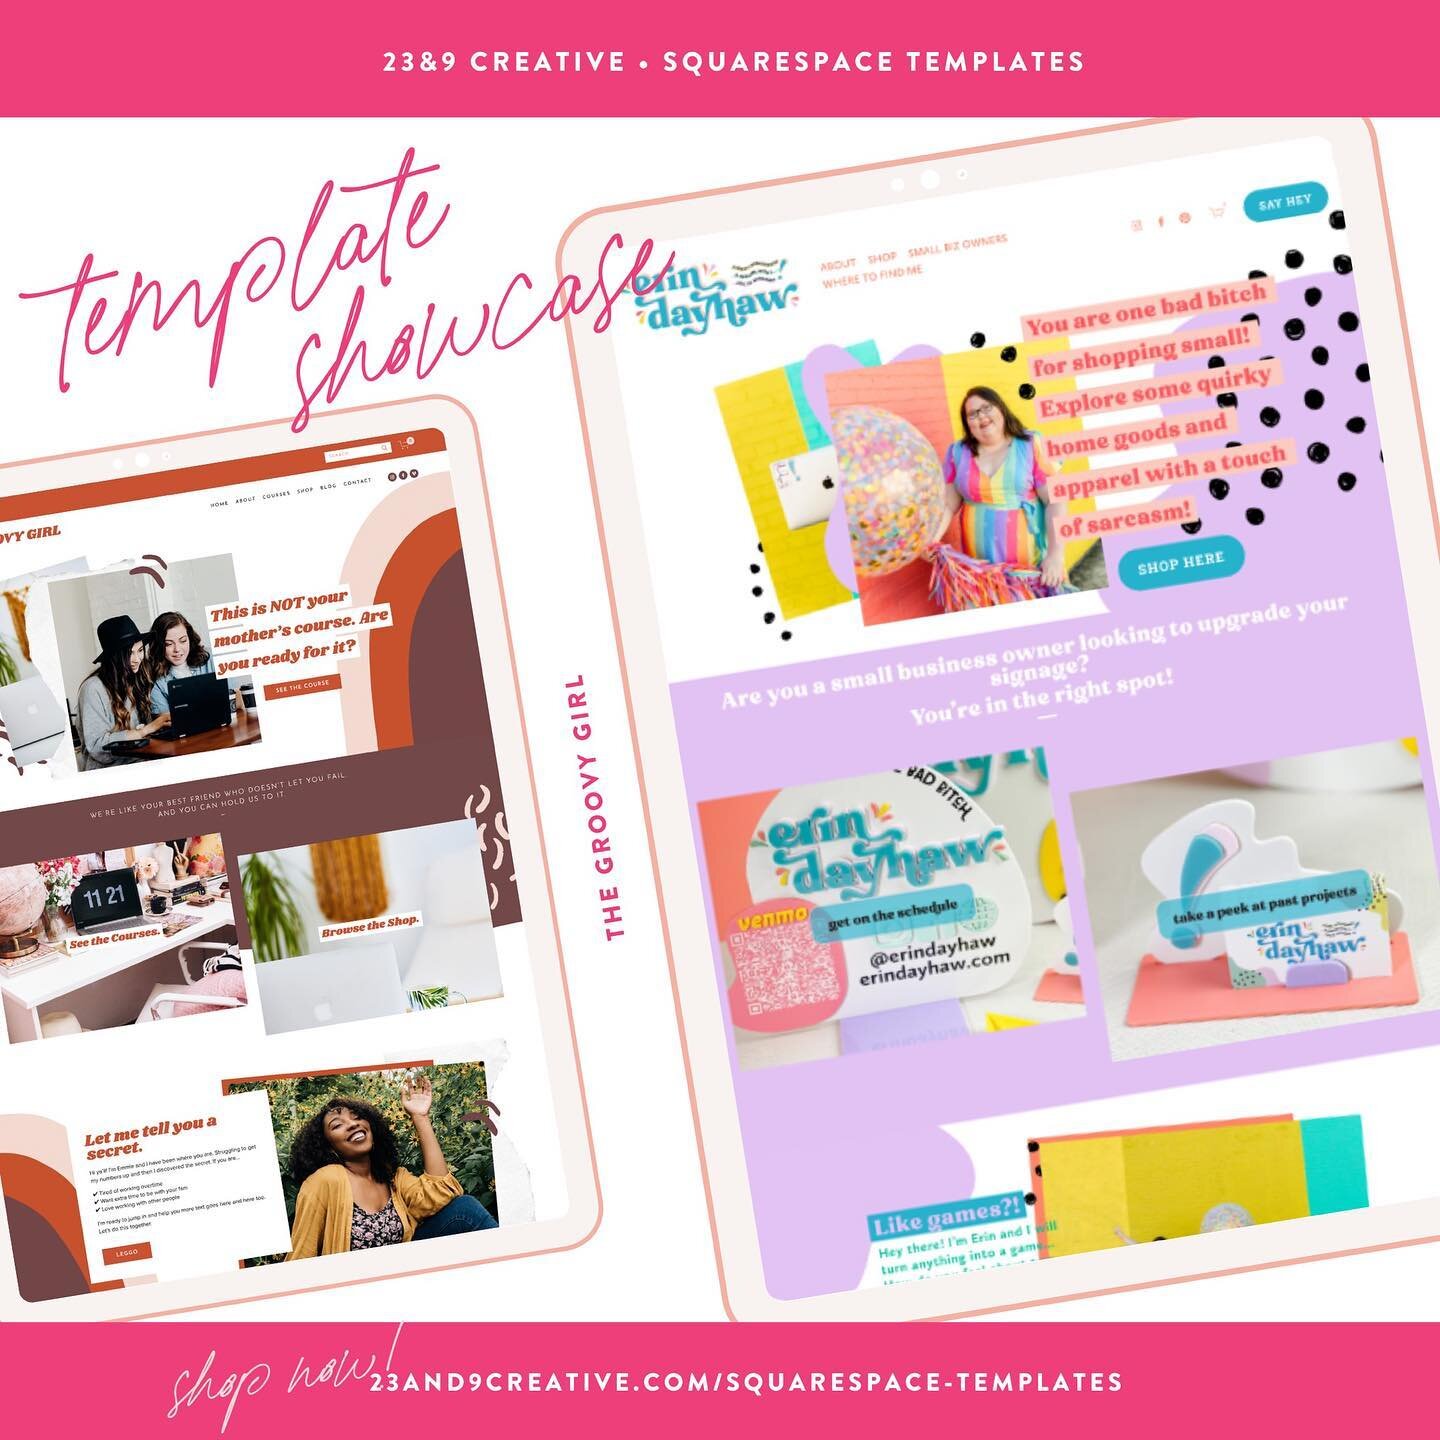 To my Groovy Girls🪩 &mdash; this modern take on the retro vibe is perfect for your new site!!🕺🏾👏🏻

Either 1️⃣keep the 70s look, or 2️⃣ add in some of your own fee and make it your own like this amazing real-life revamp!

👉🏻 No matter the brand